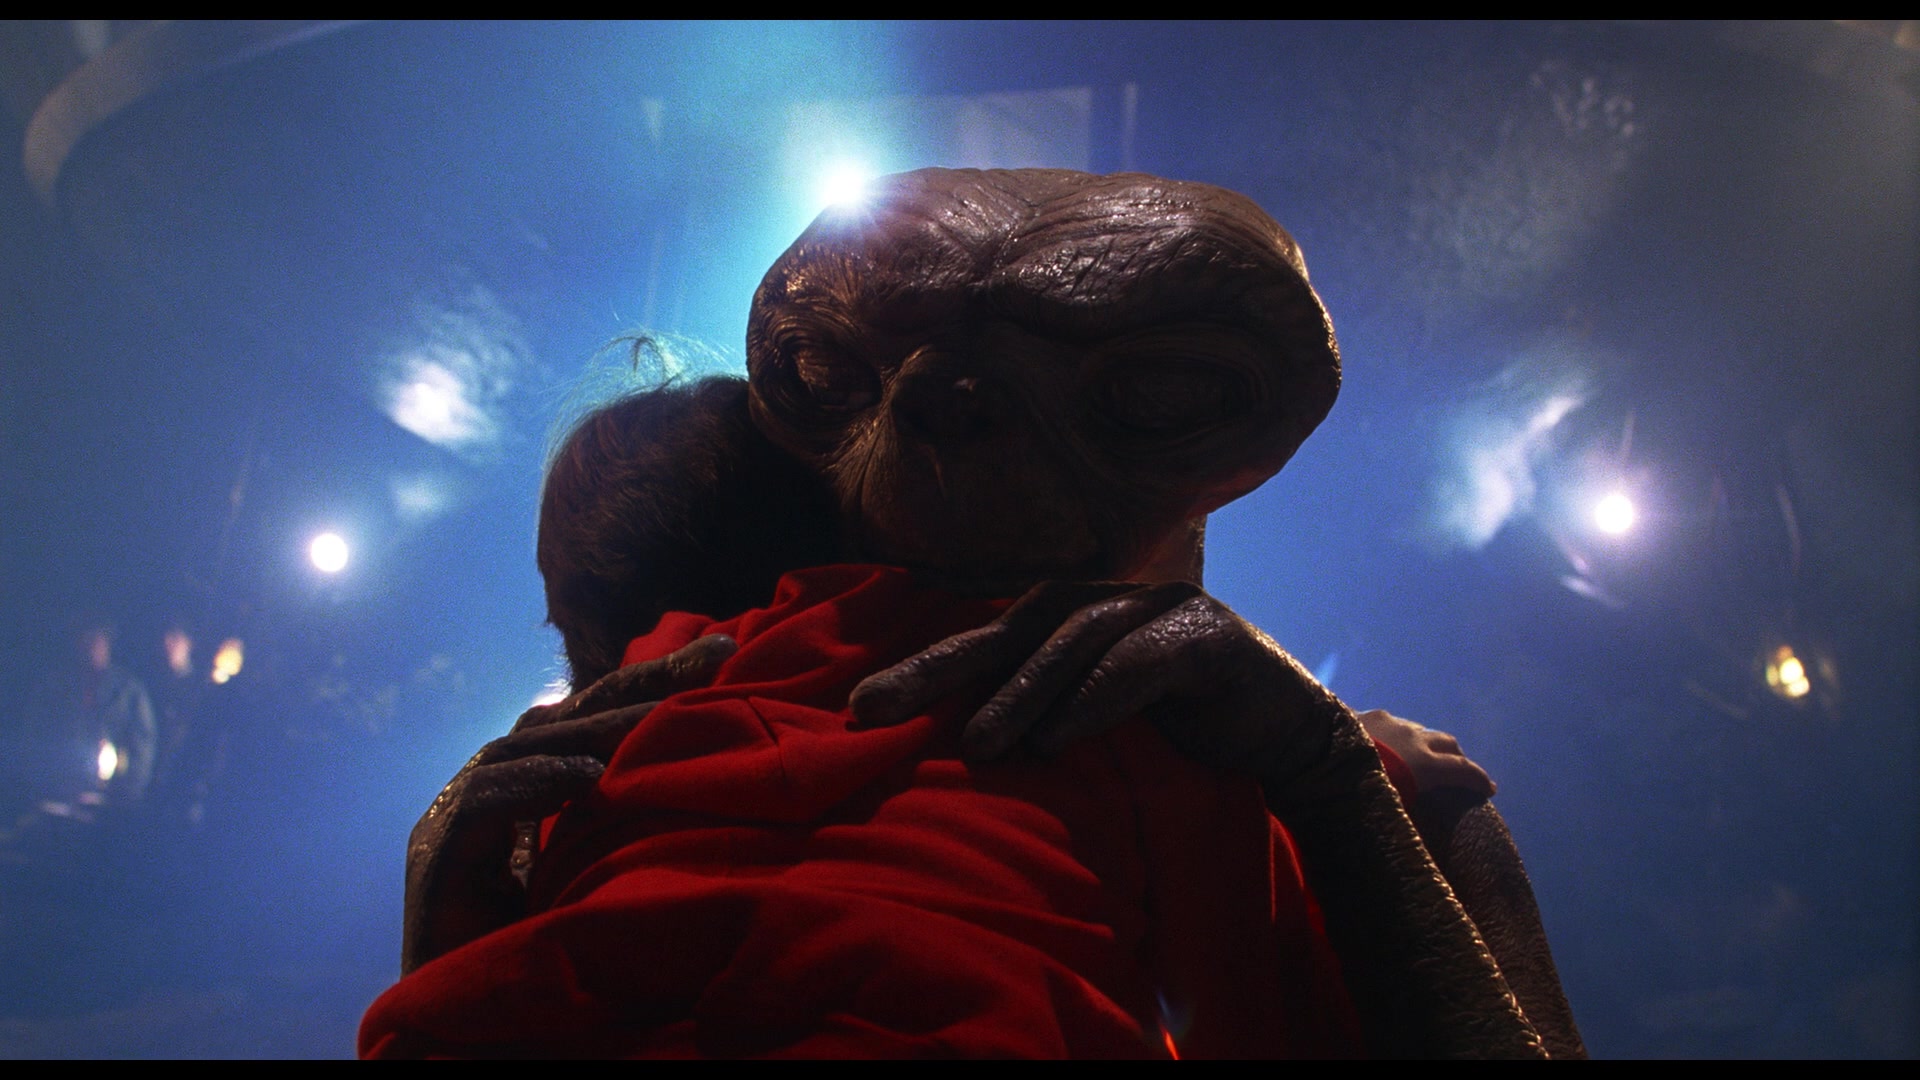 E.T. (Pat Welsh/Steven Spielberg/Kayden Green) says good-bye to Elliott (Henry Thomas) in E.T. the Extra-Terrestrial (1982), Universal Pictures